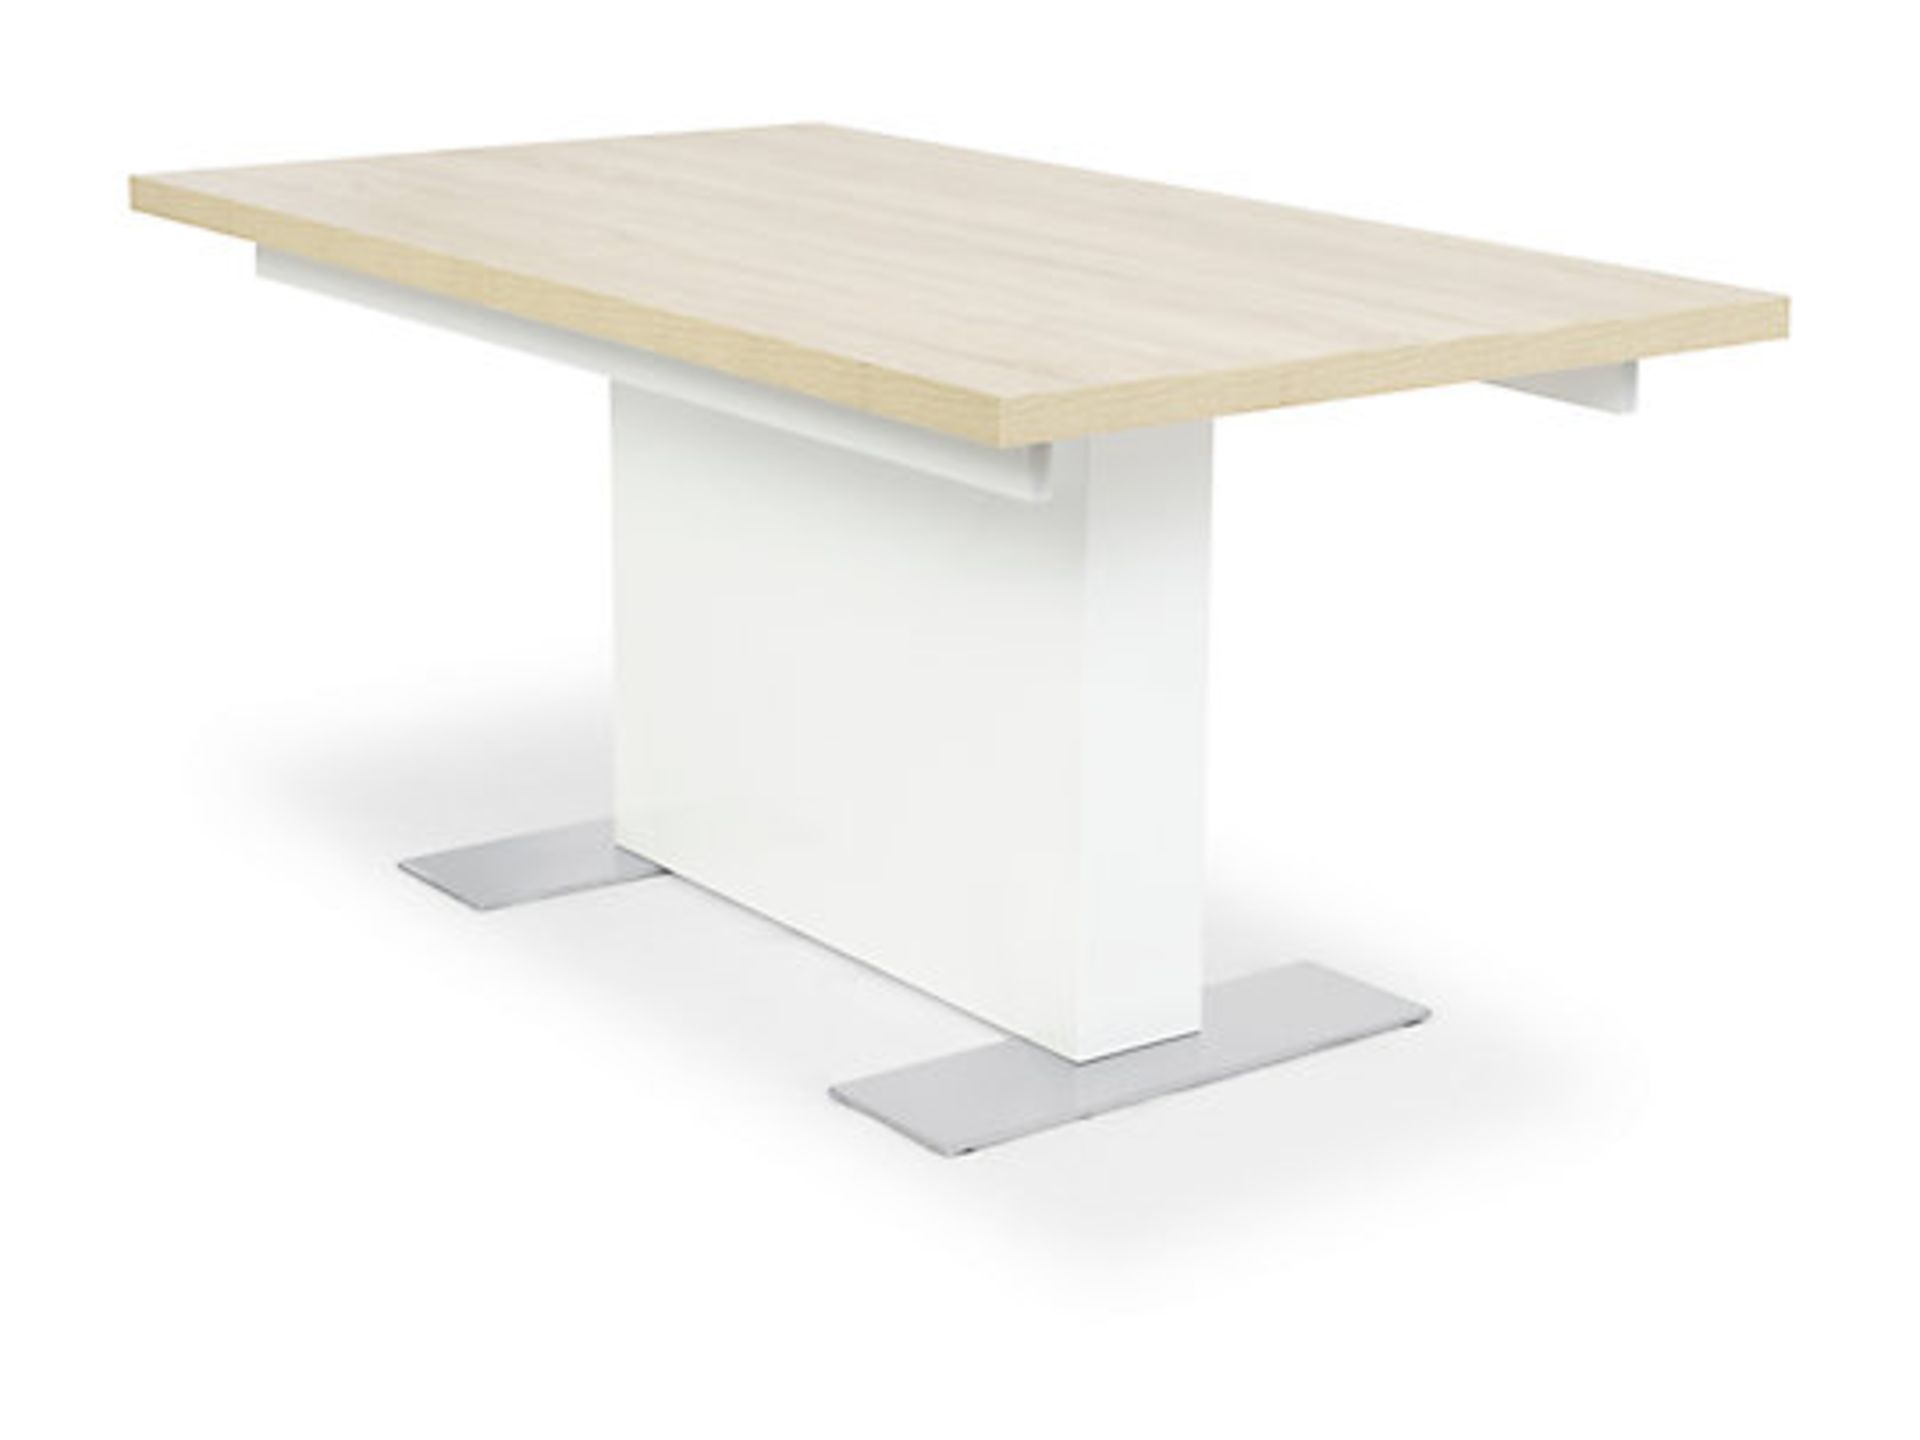 Brand New Boxed Vieux White Extending Dining Table - Image 2 of 2